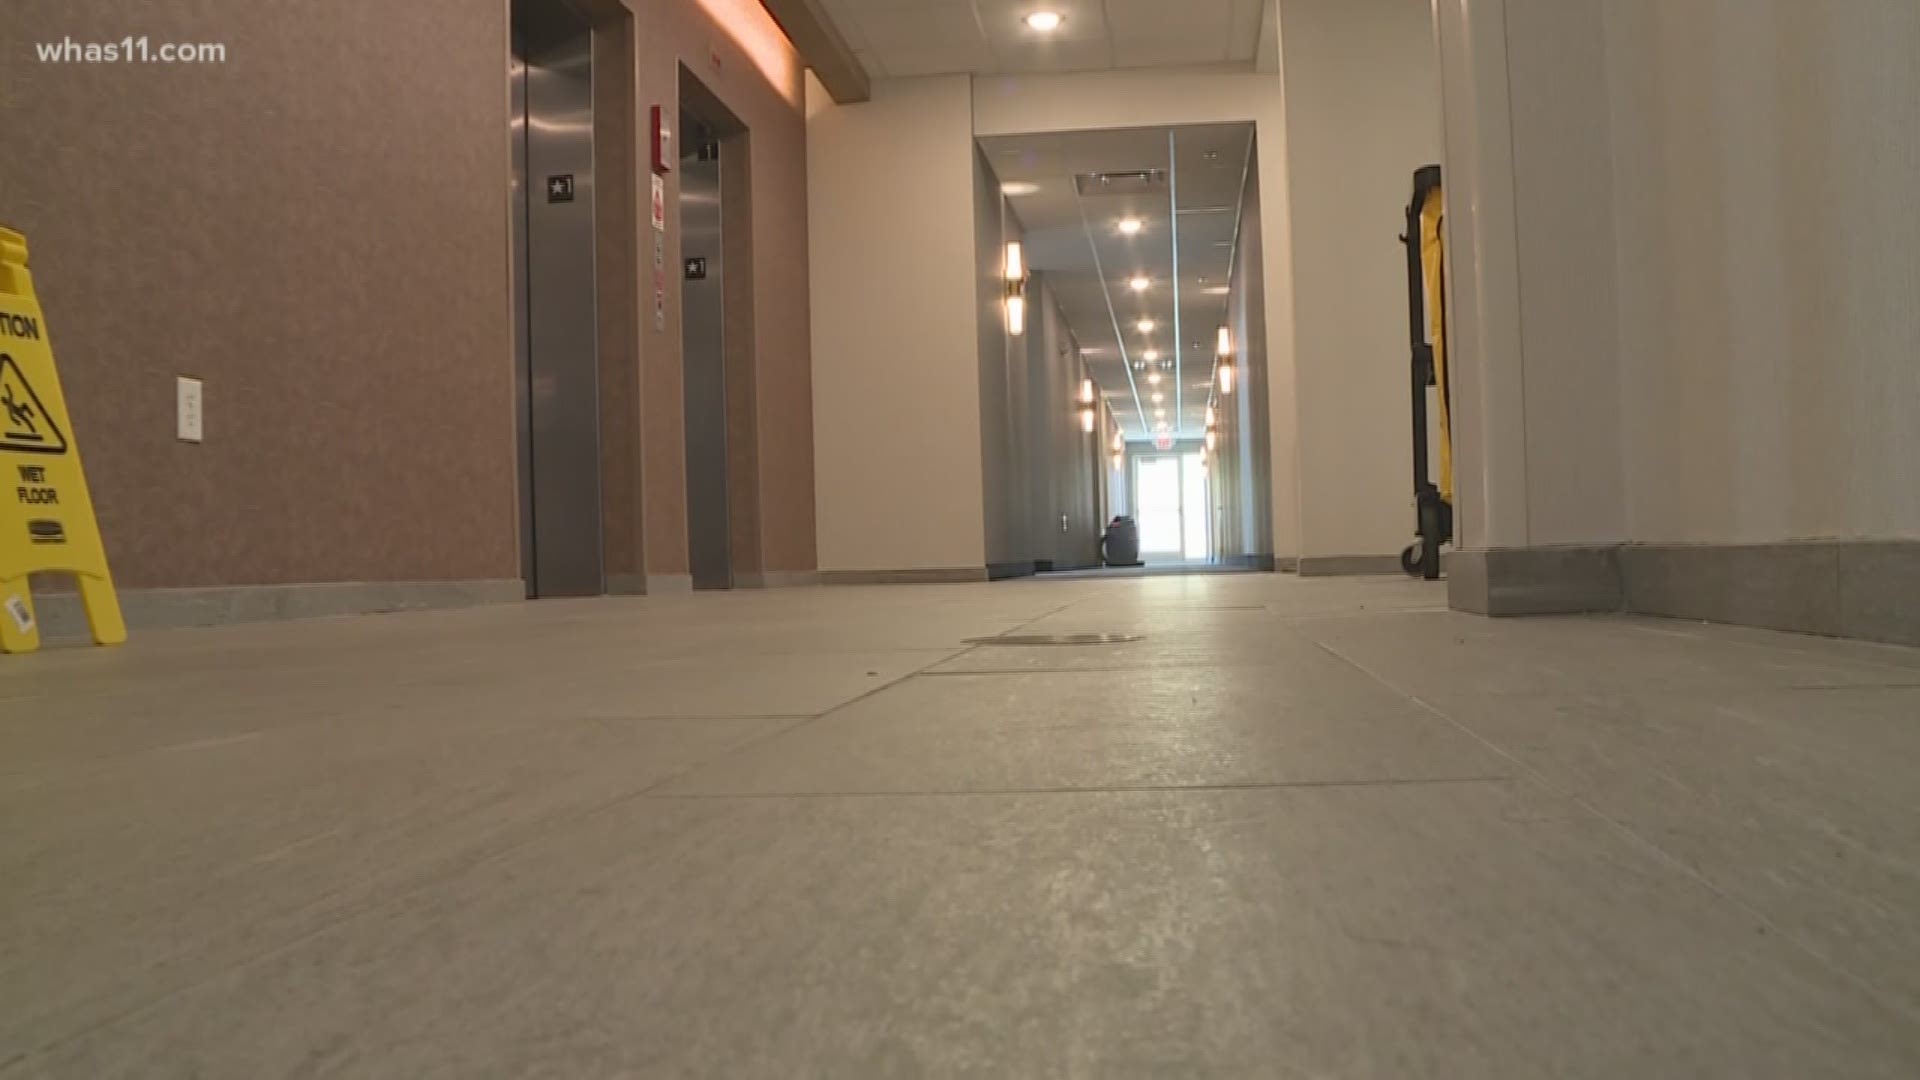 It's the newest hotel to open in New Albany, Indiana in nearly 20 years. The project is not only part of a project to revitalize the area but plans to help families who have loved ones in the hospital.